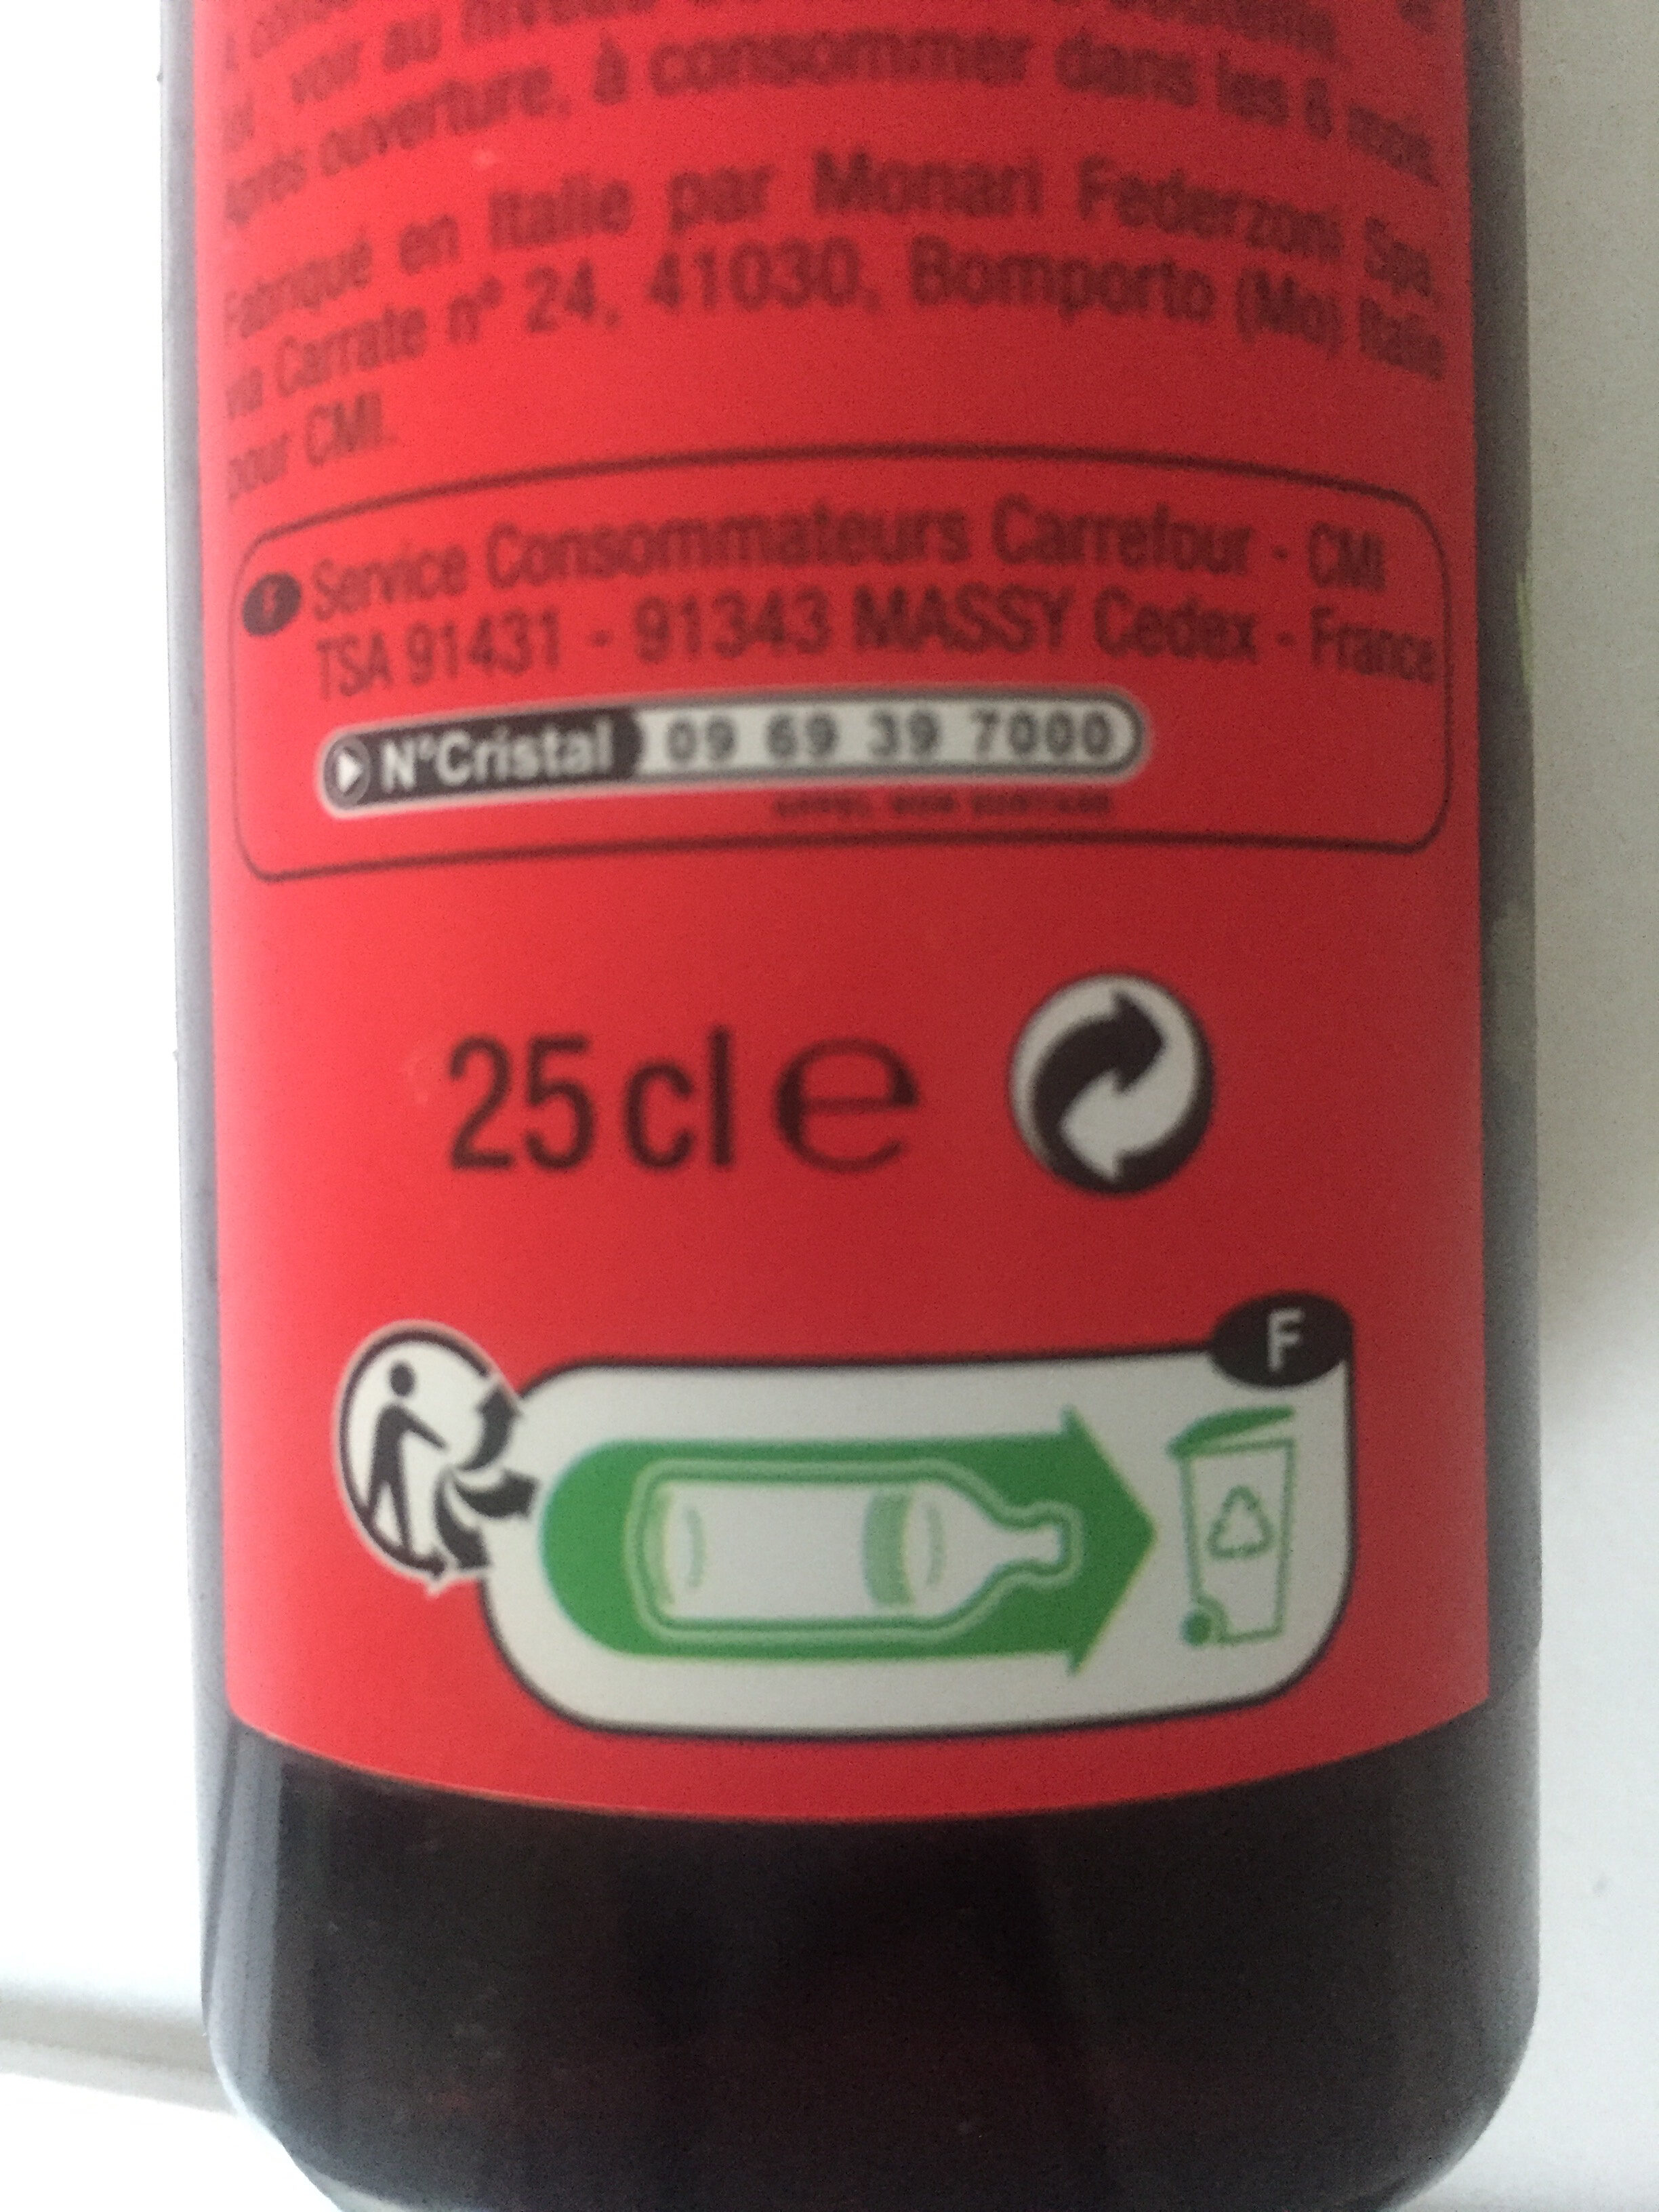 Douceur à base d'aceto balsamico di modena IGP - Recycling instructions and/or packaging information - fr